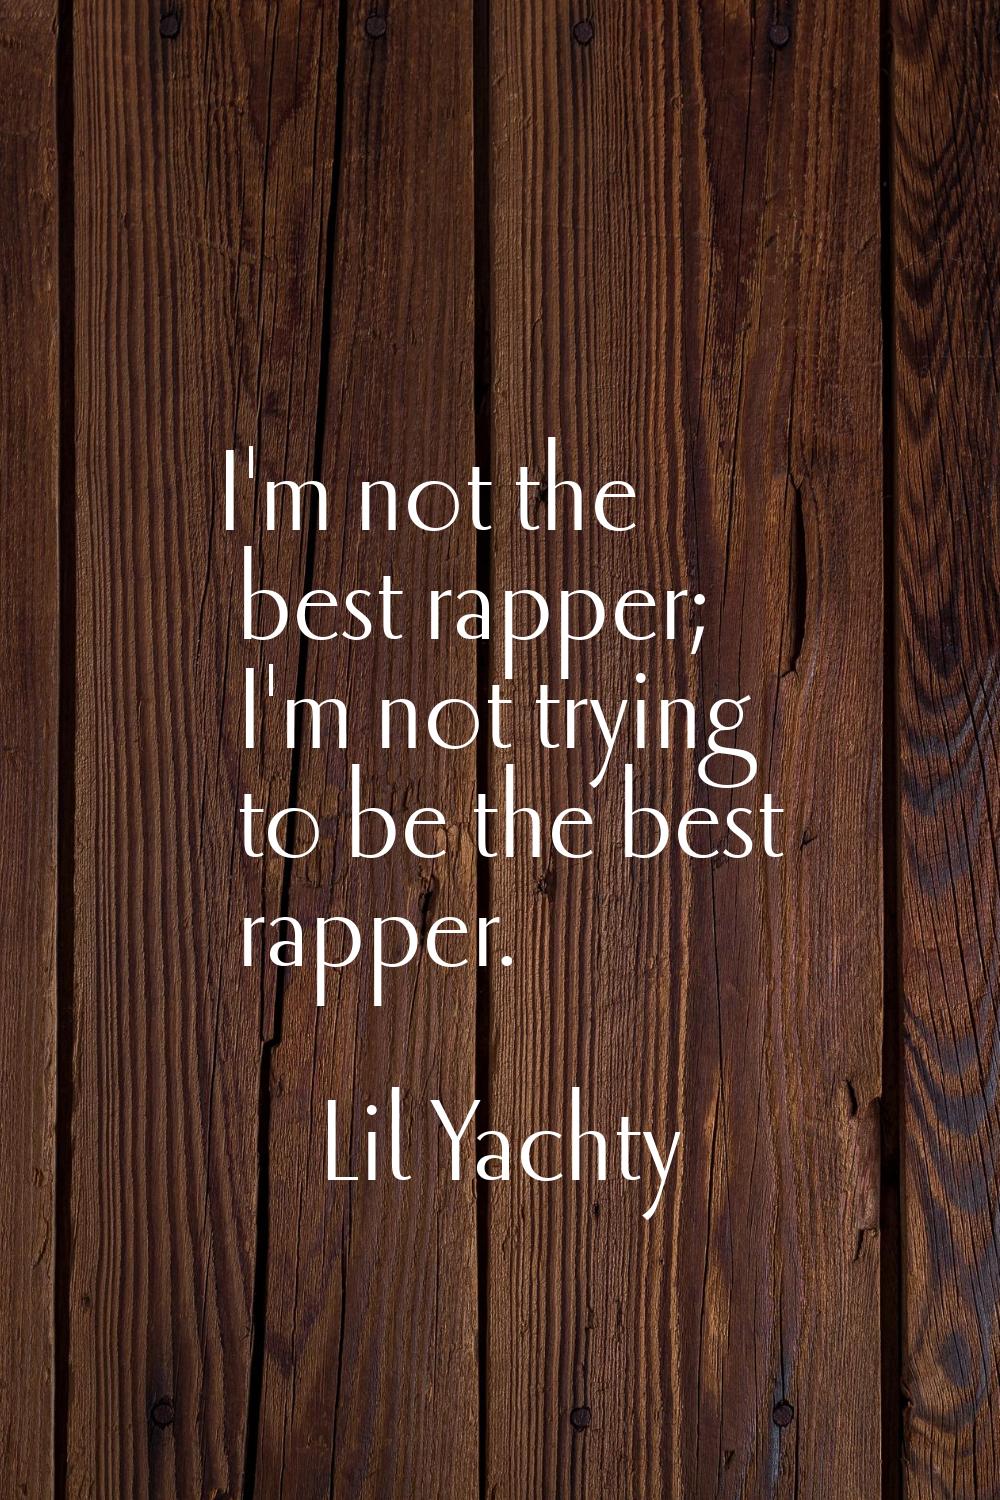 I'm not the best rapper; I'm not trying to be the best rapper.